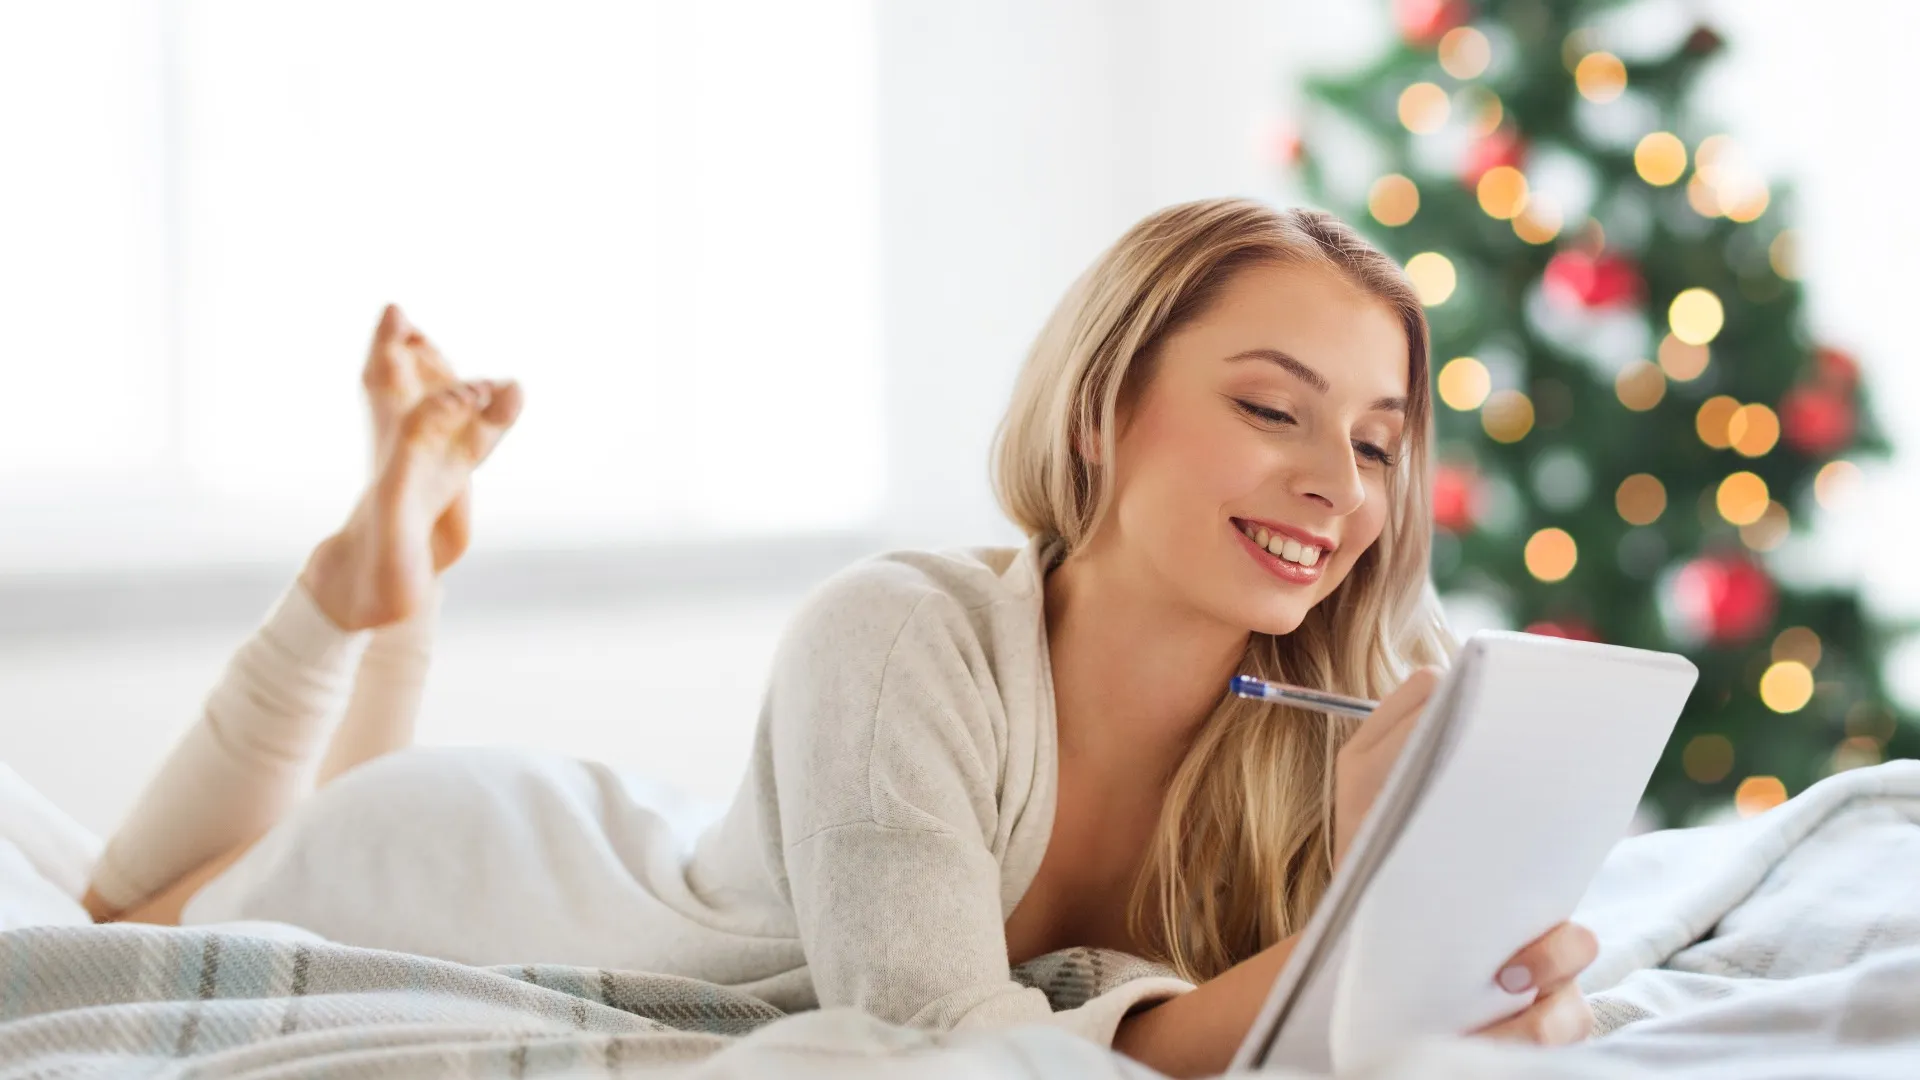 Get Your Health Back on Track for the Holidays (8 Tips to Keep it on Track)